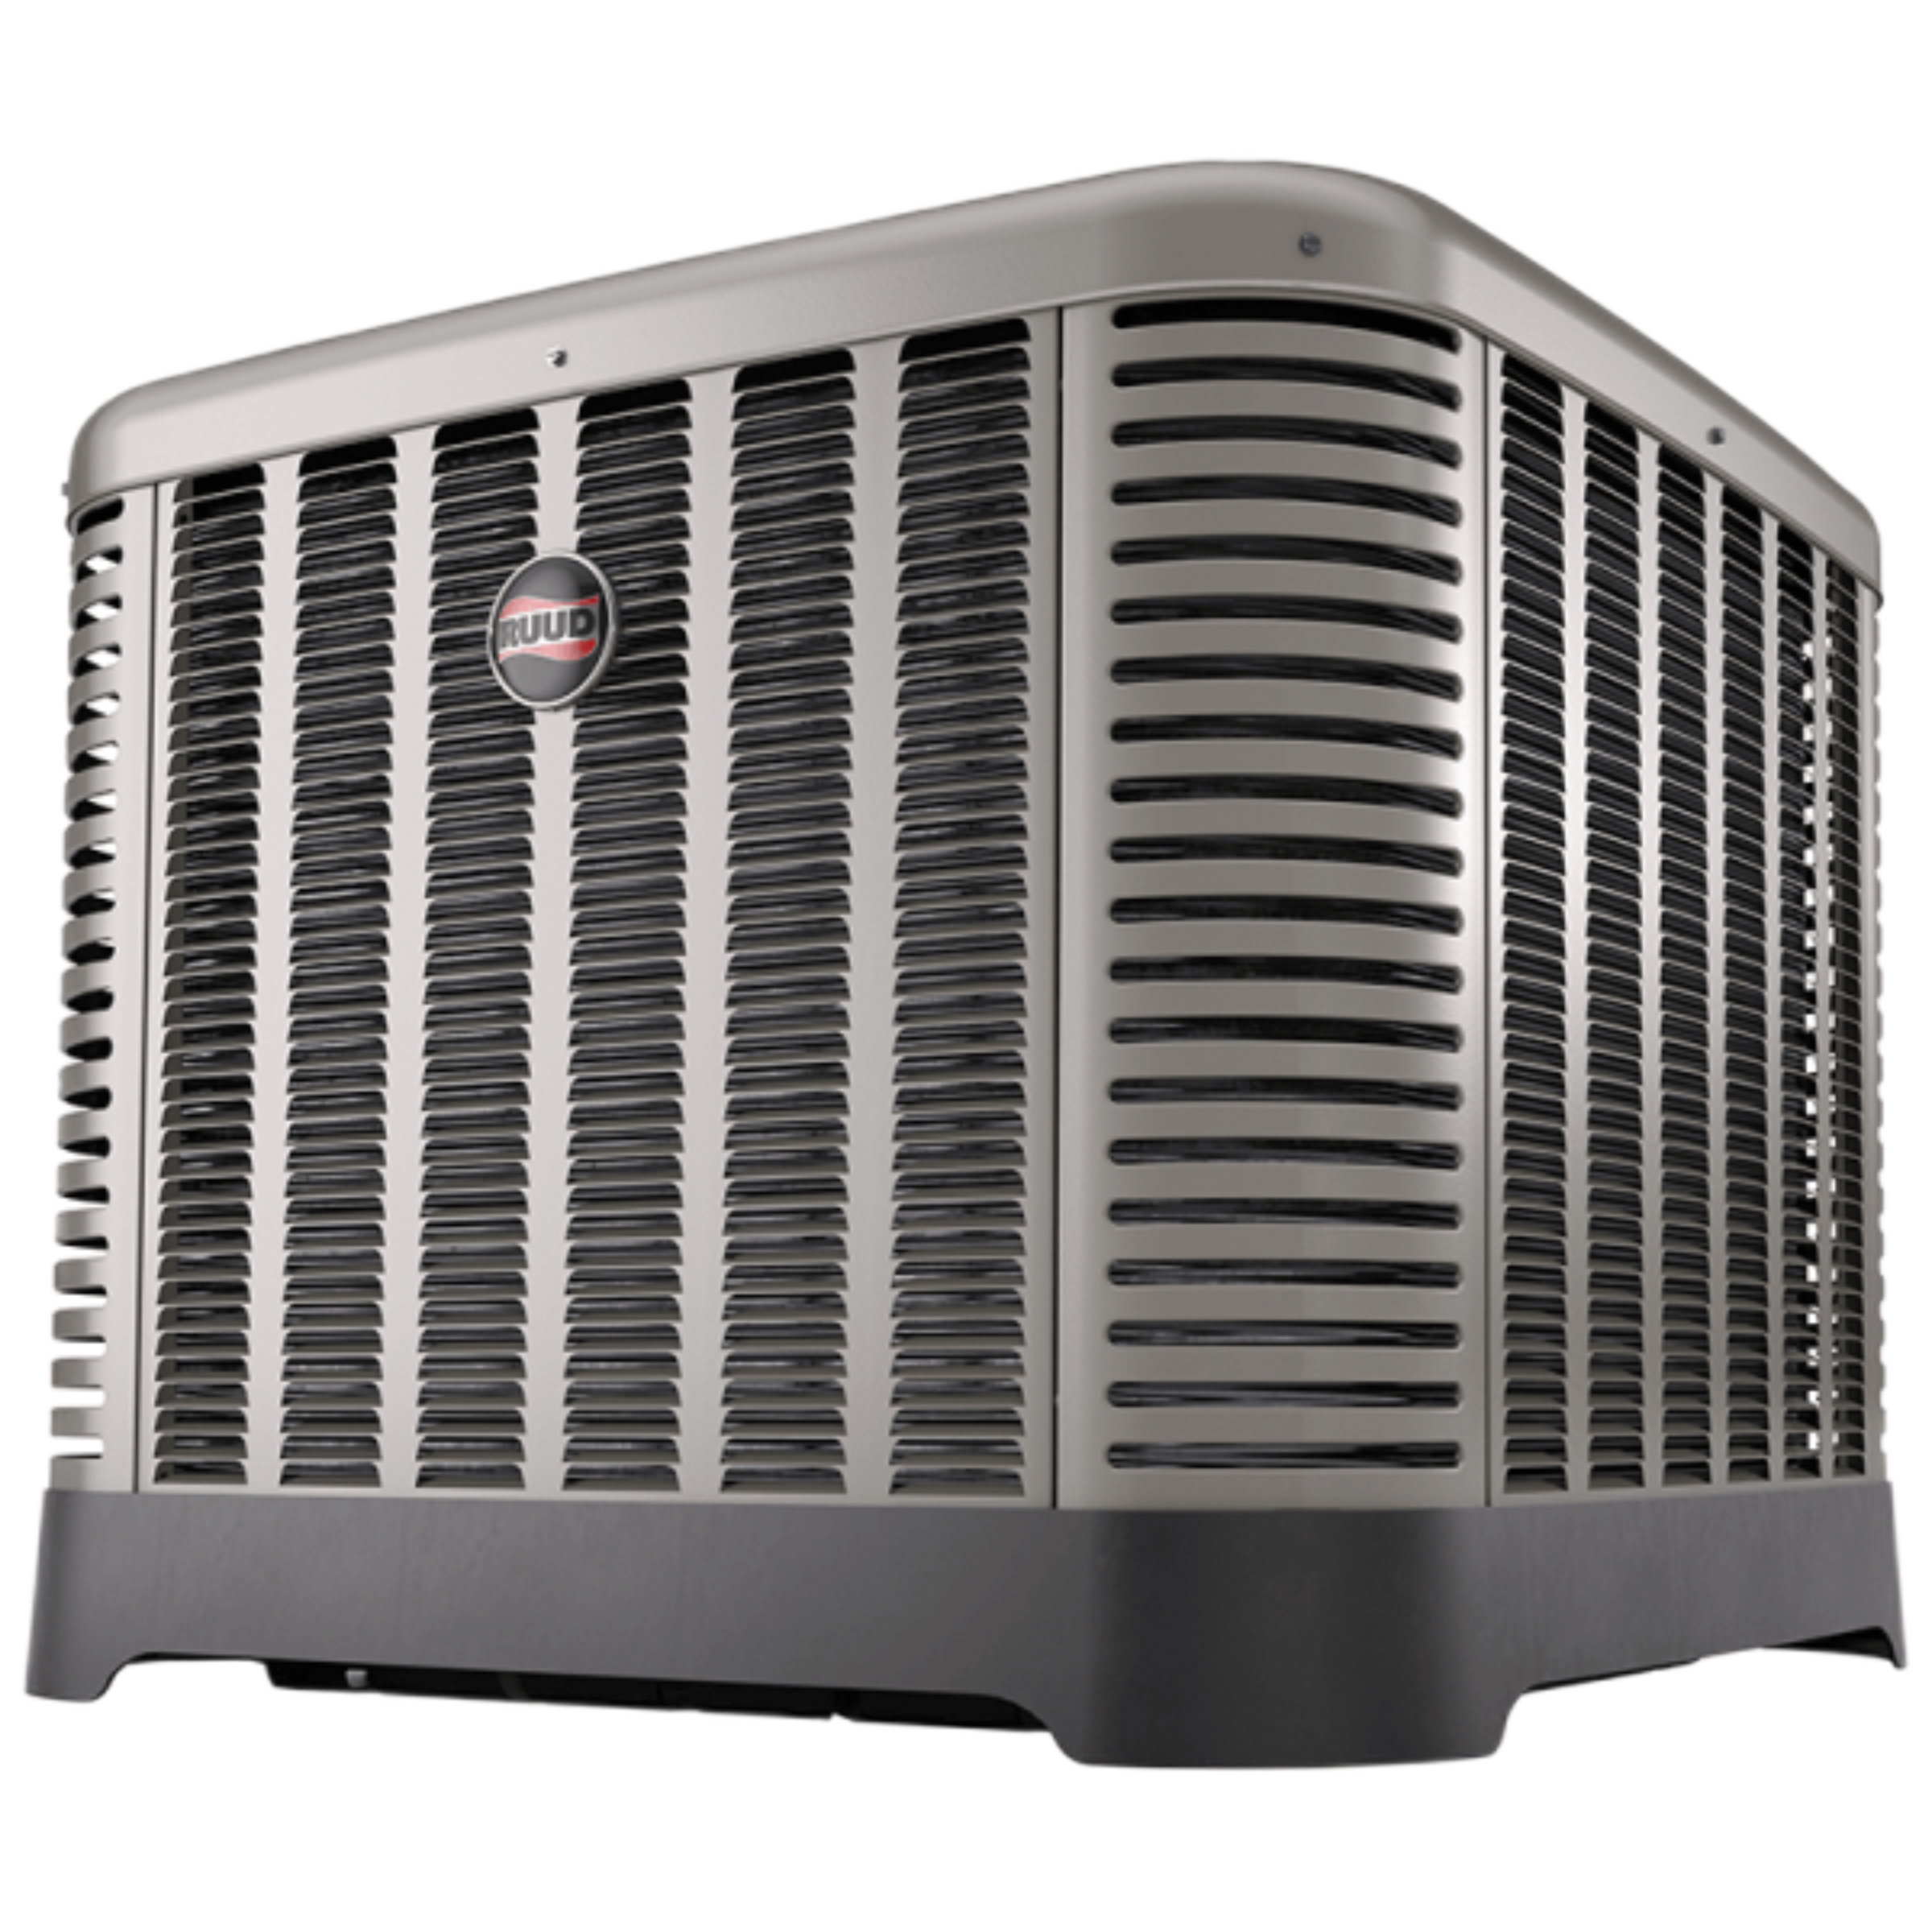 RA13 Ruud Achiever Series Single-Phase Air Conditioning Condensing Unit 13 SEER/11.5-13 EER, 1.5 to 5 Tons, Cooling Capacities 17.3 to 60.5 kBTU, 208-230V/1Ph/60Hz